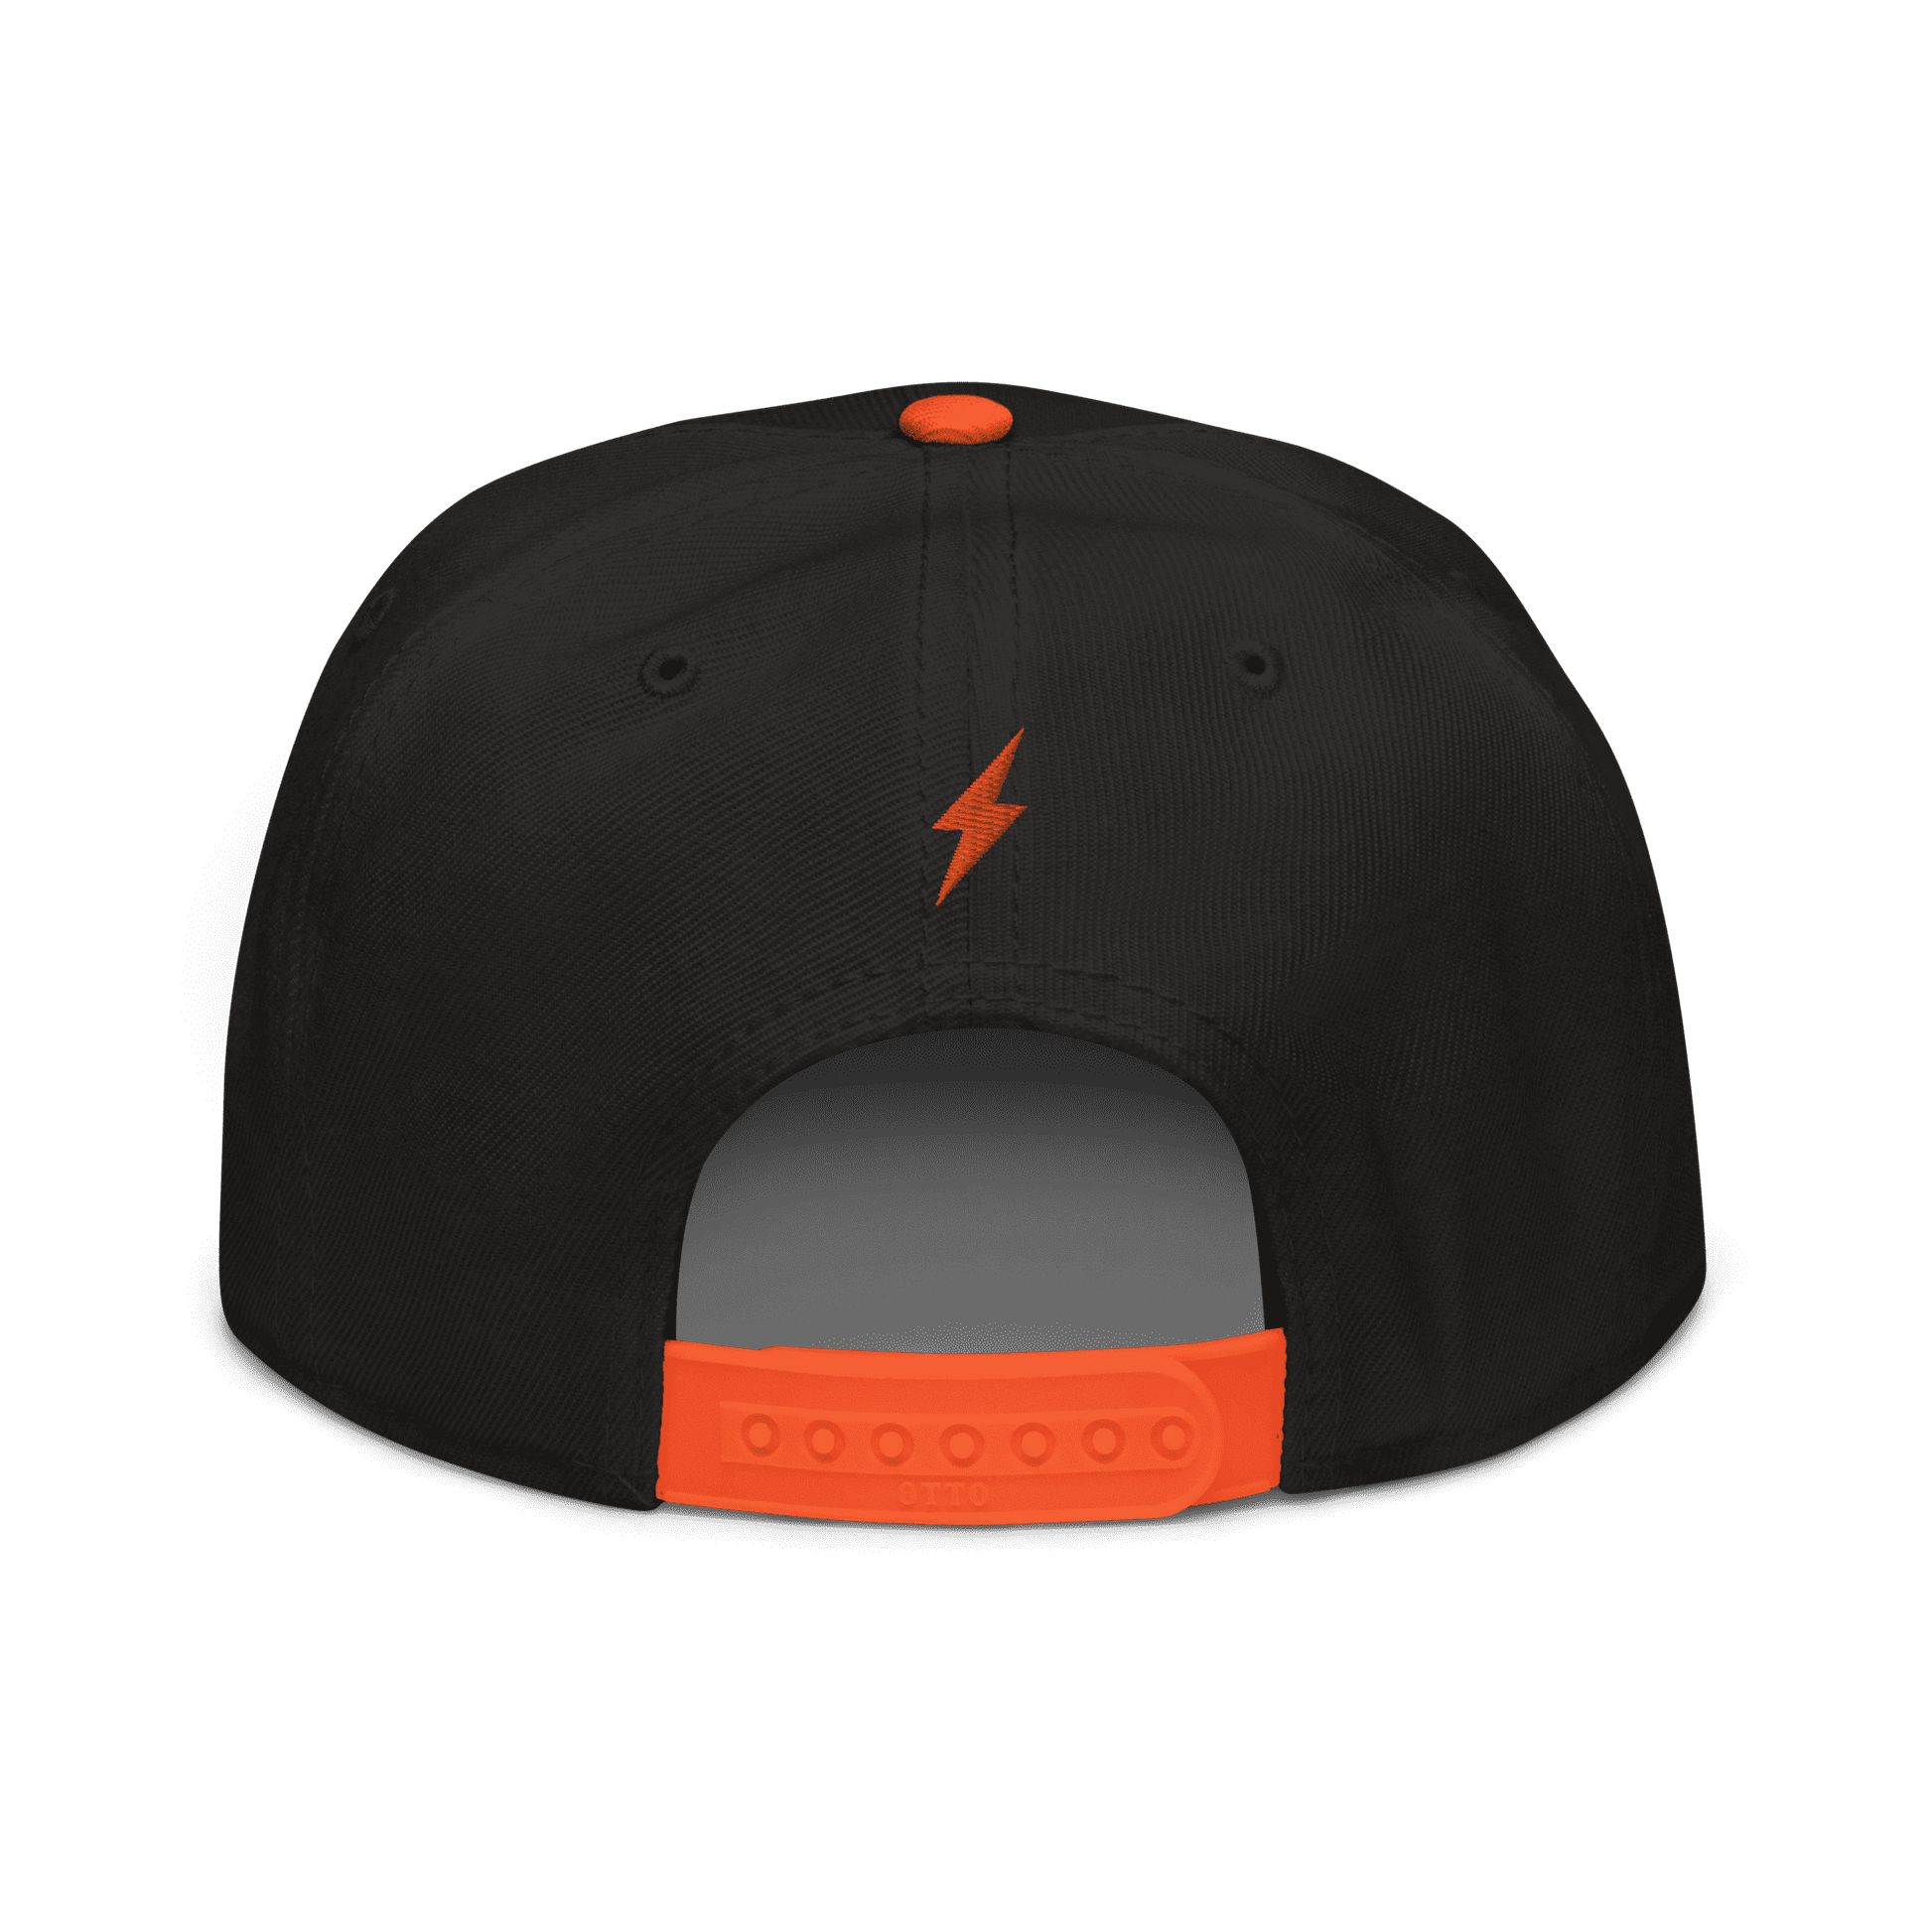 Back view of a black and orange bitcoin snapback hat.